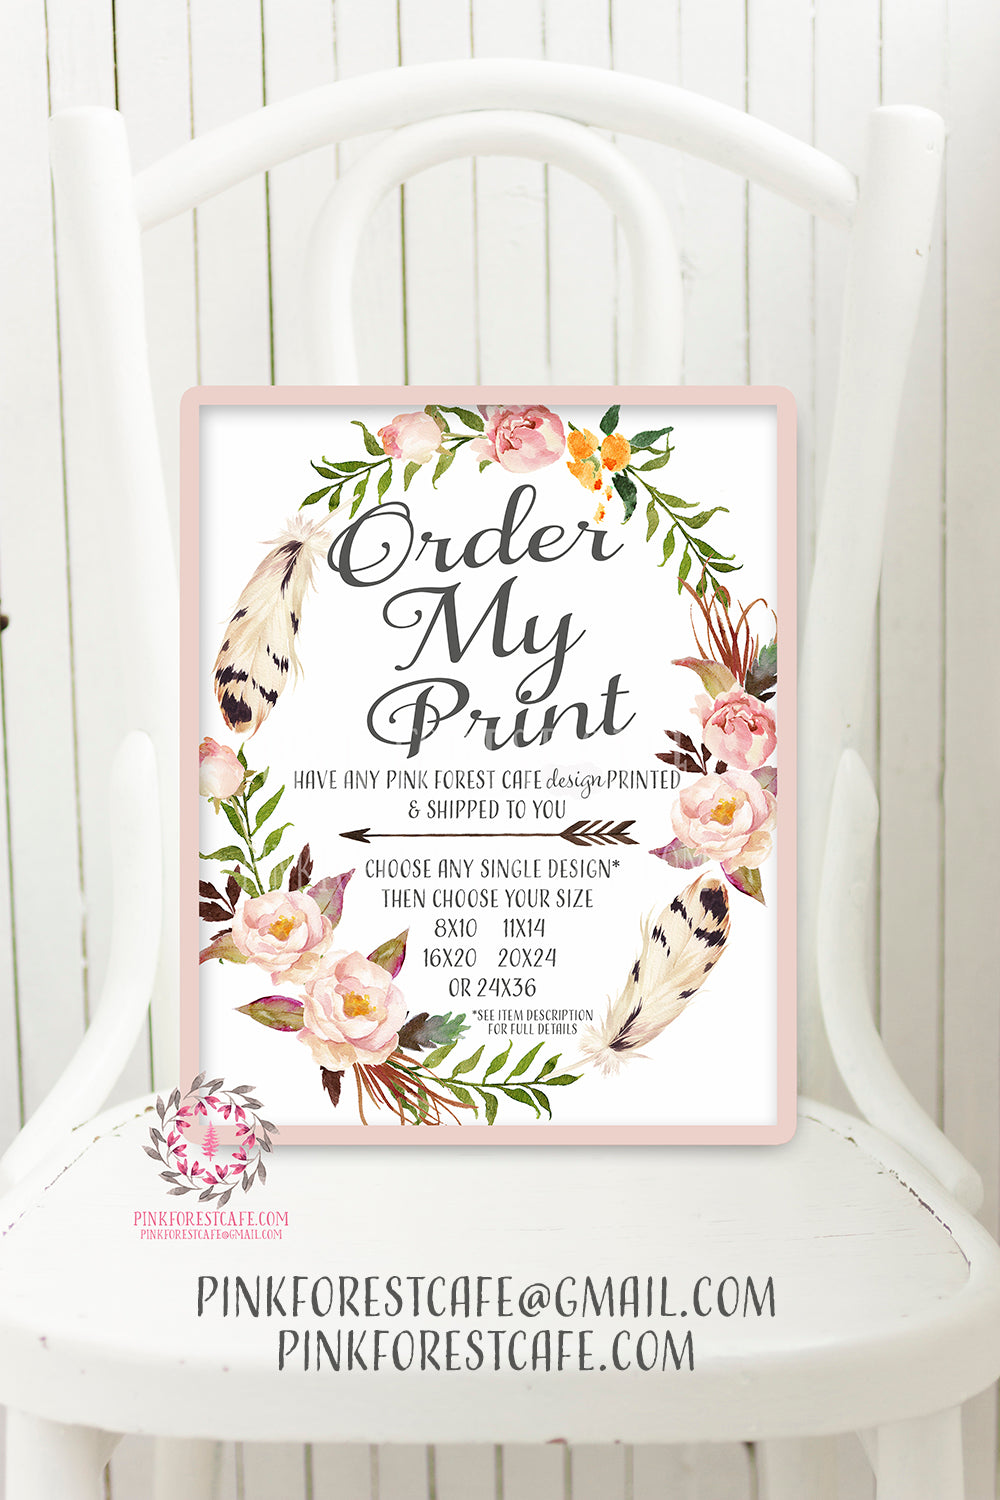 Order My Print - Pink Forest Cafe - Single Design Print - Printed and Shipped